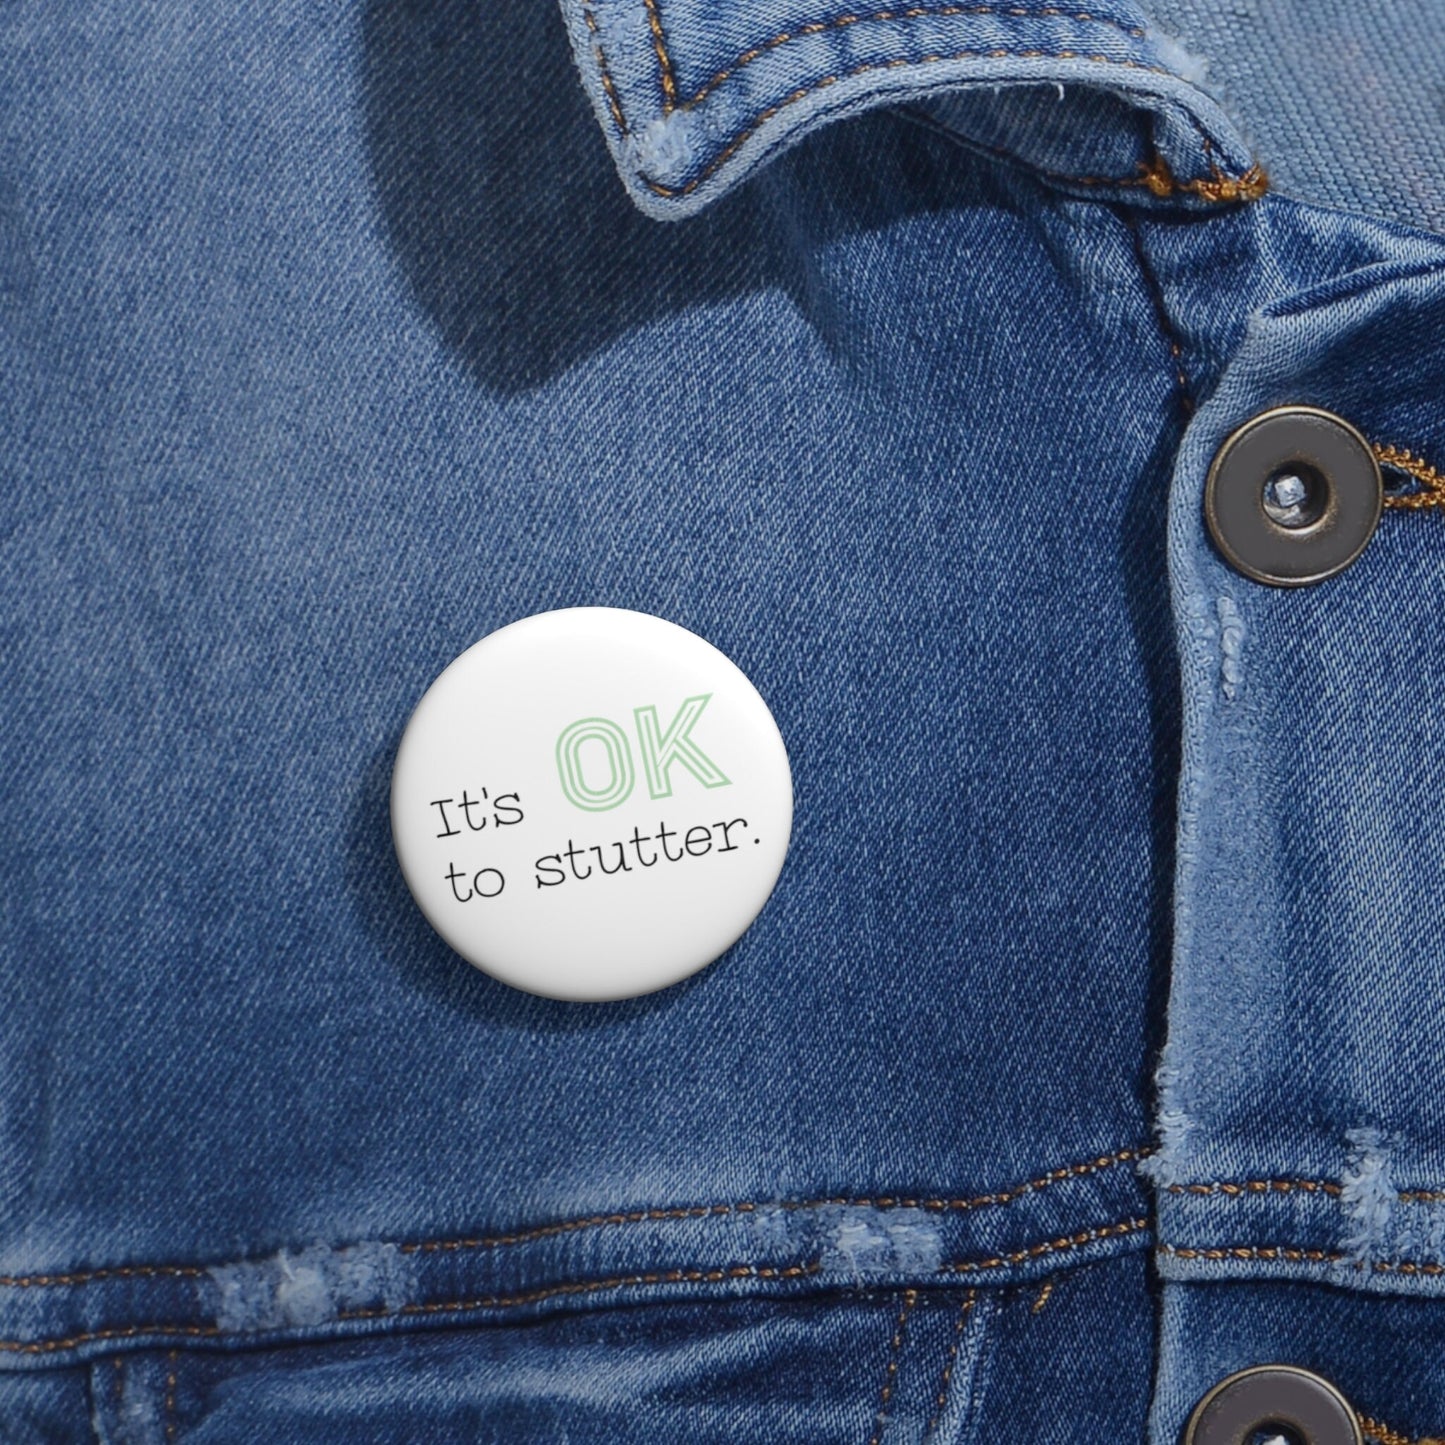 It's OK To Stutter Pin Button 1.25" 2.25" or 3"